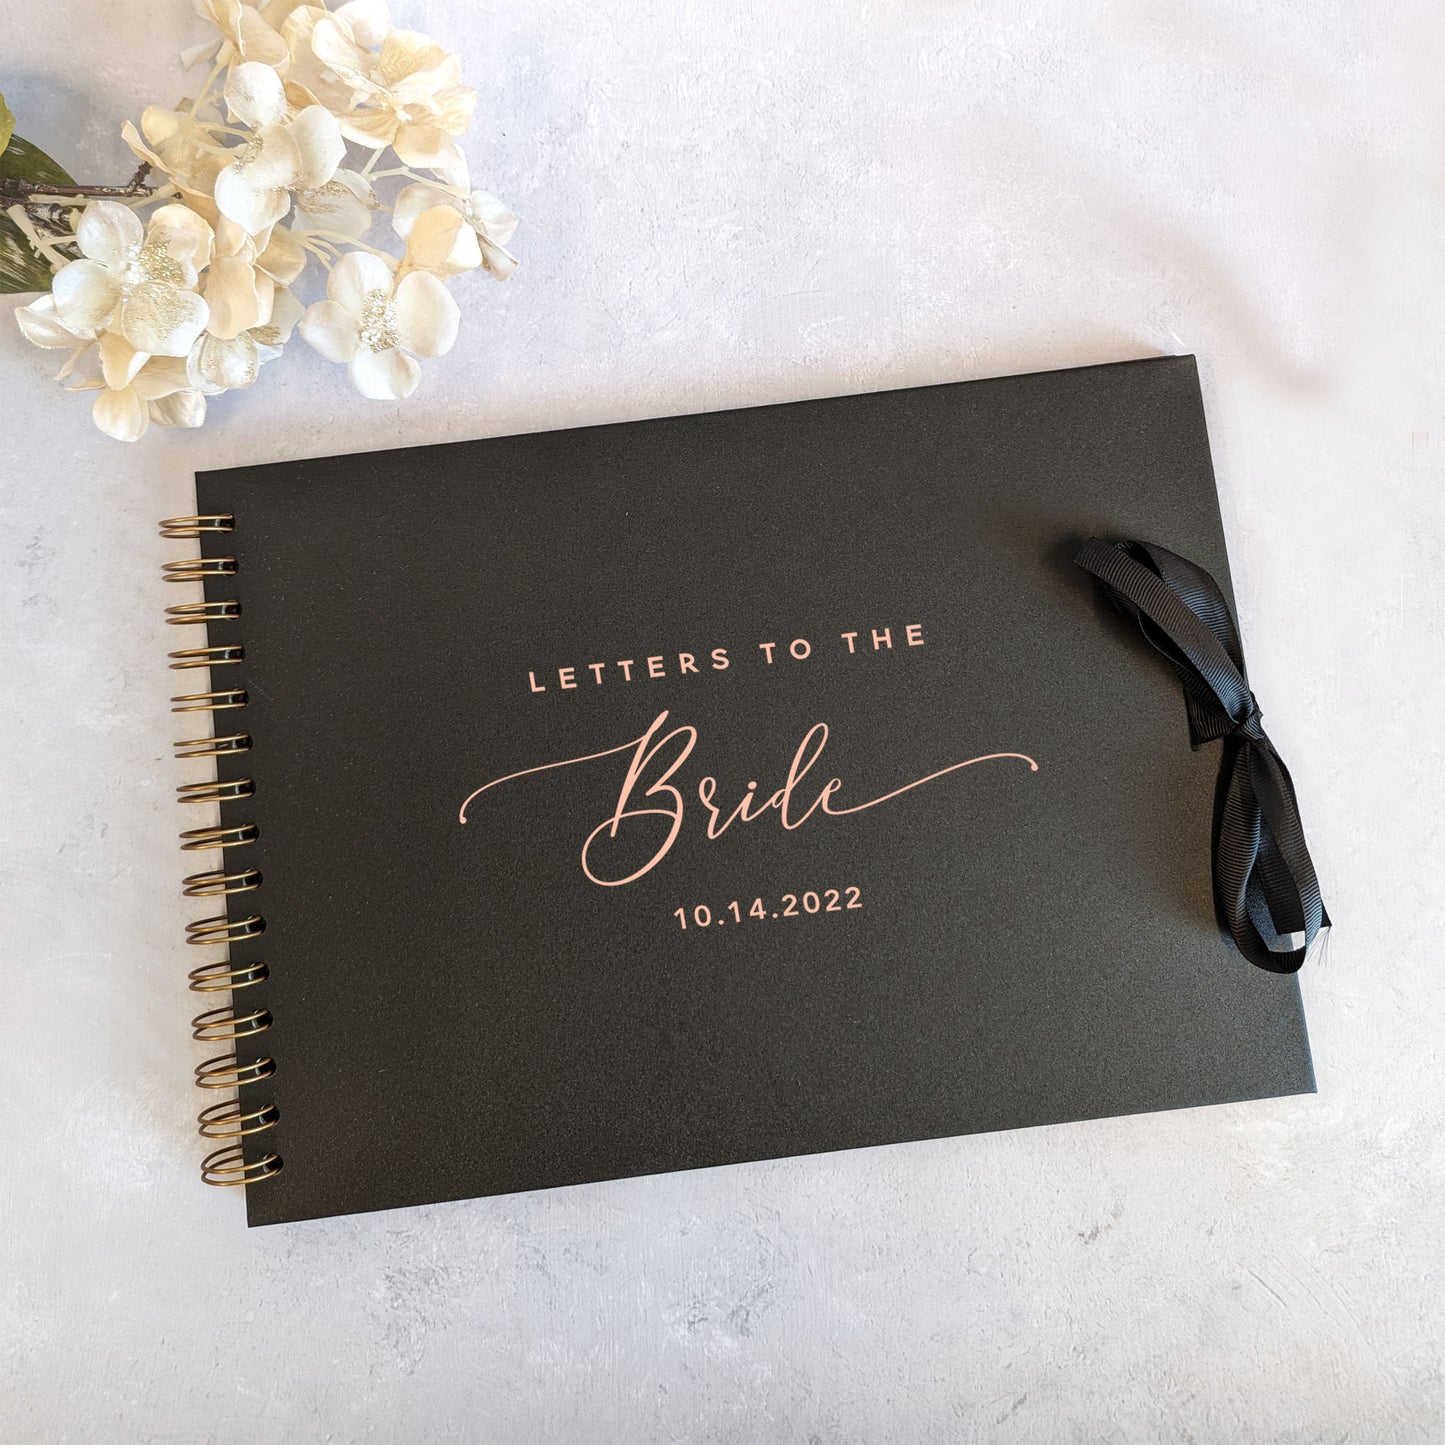 Letters to the Bride A4 Scrapbook Album - Personalised